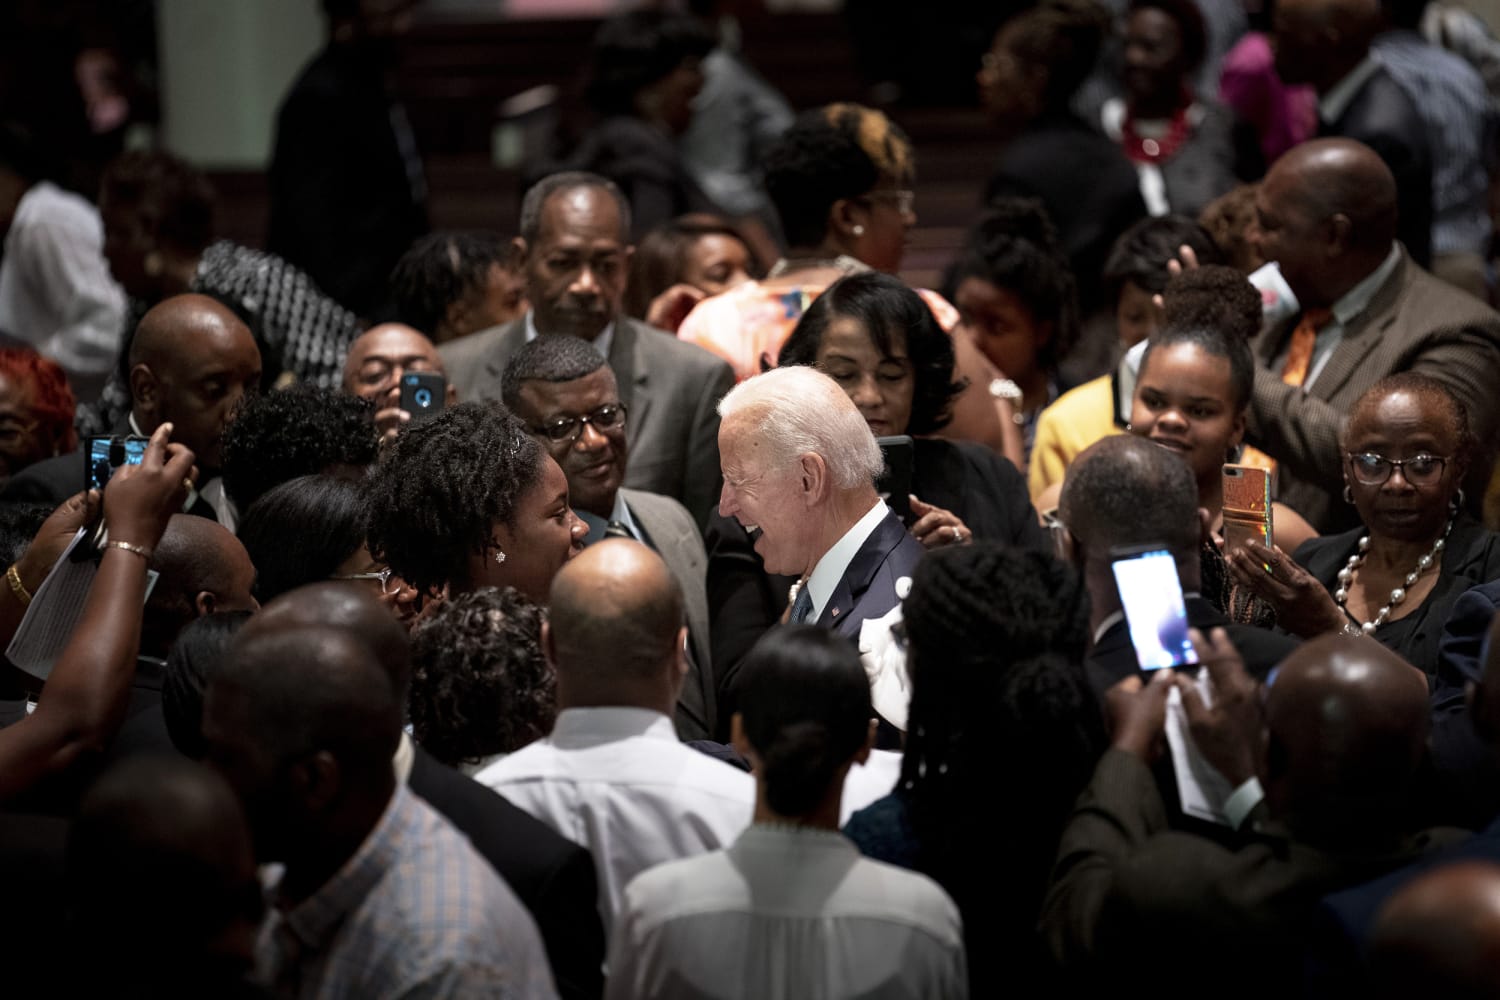 Nearly a year in, Black people aren’t sold on Biden — but they haven’t given up, either